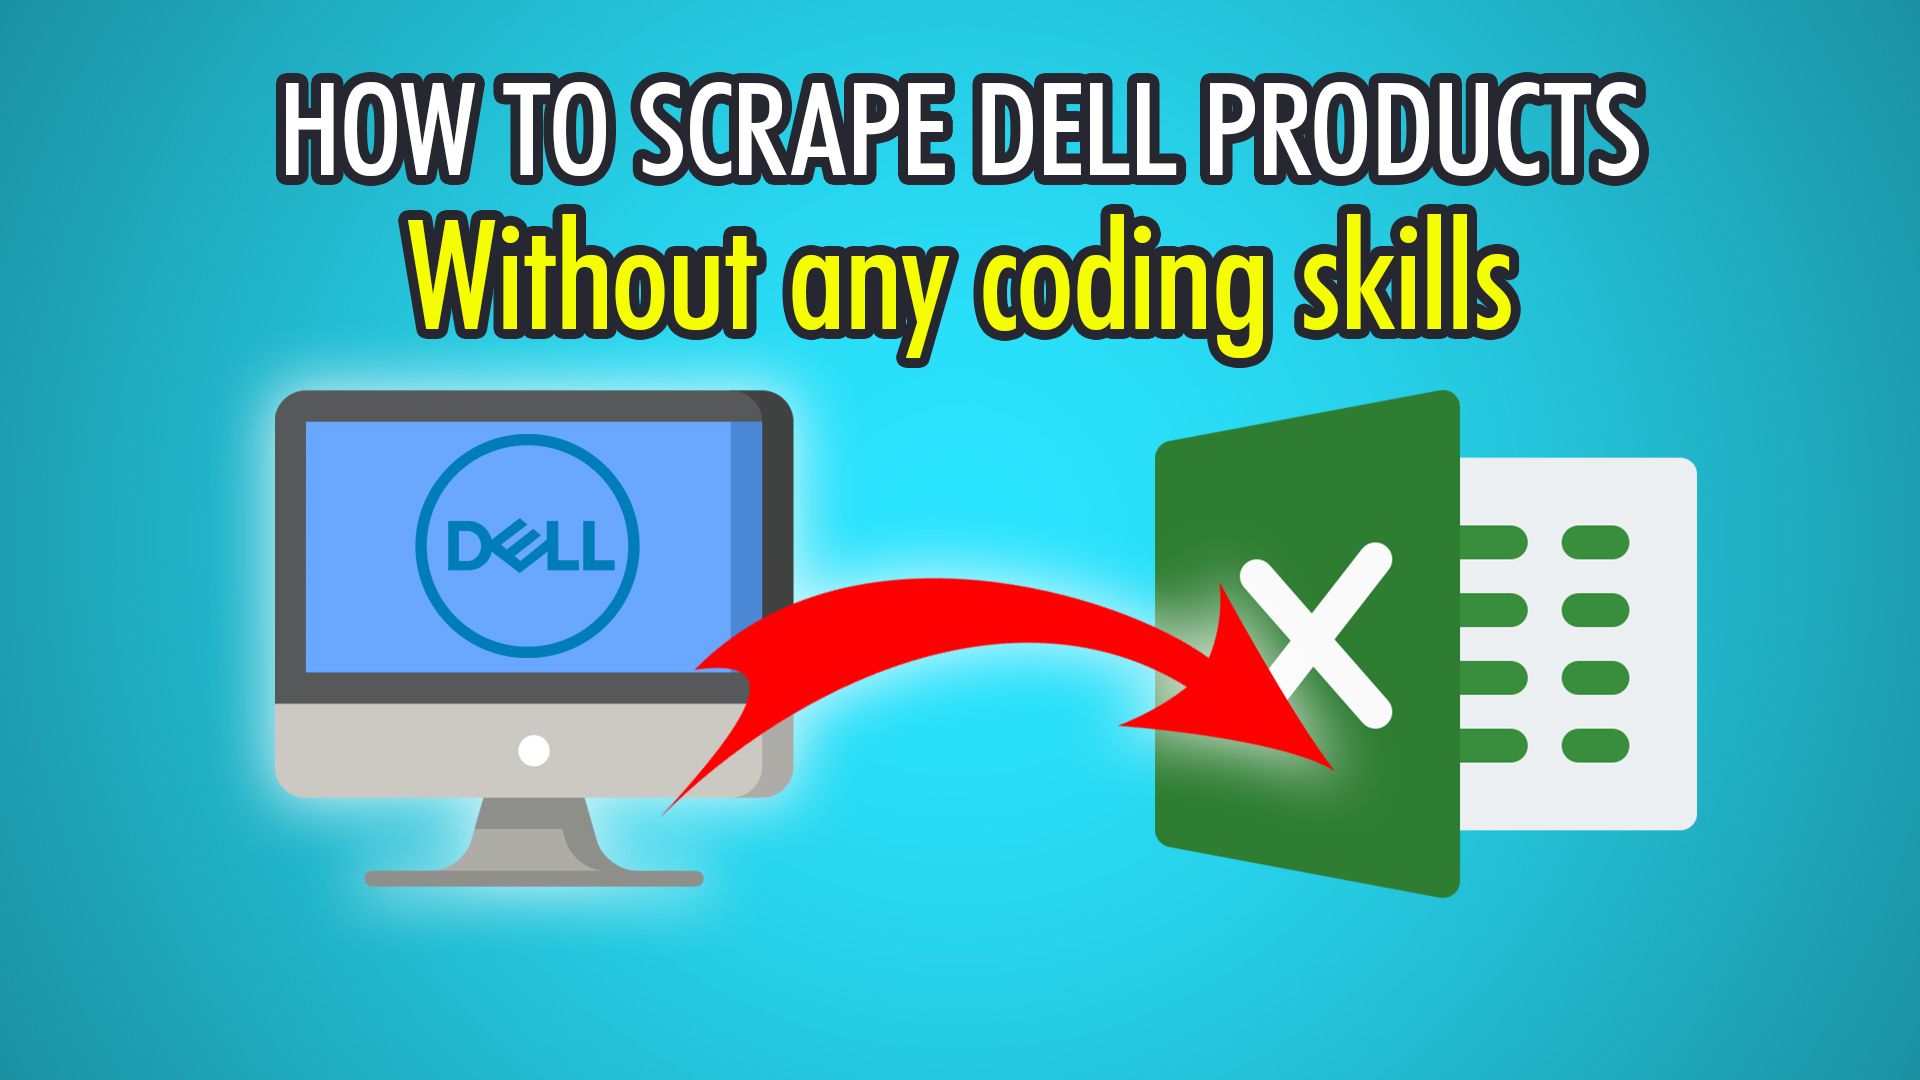 How to Scrape Dell Products